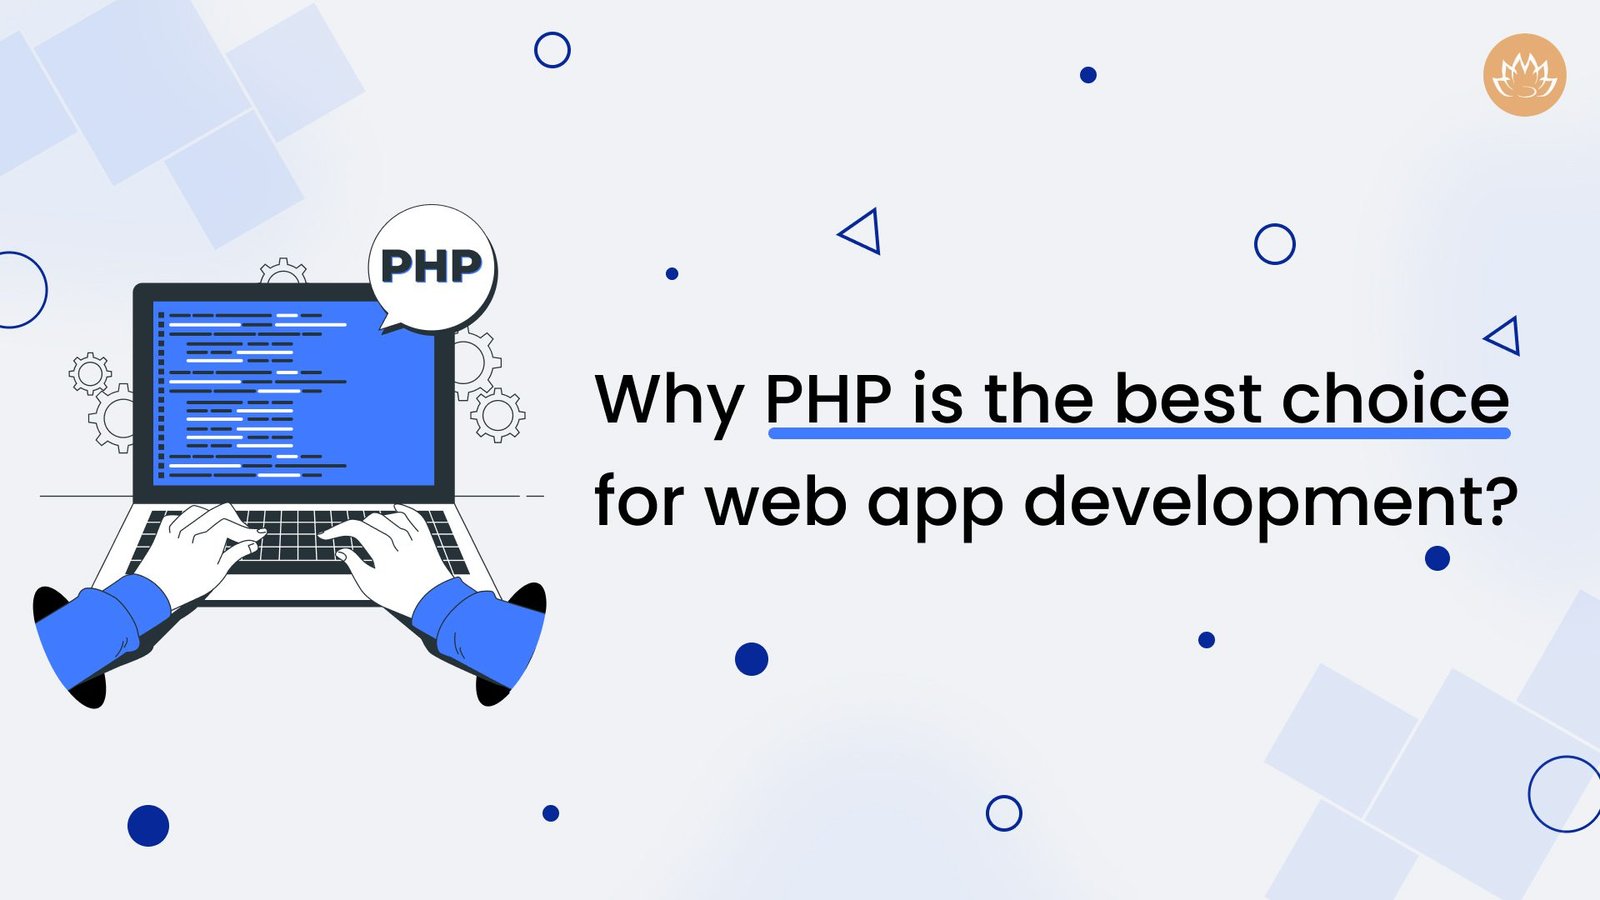 Why PHP is the best choice for web app development